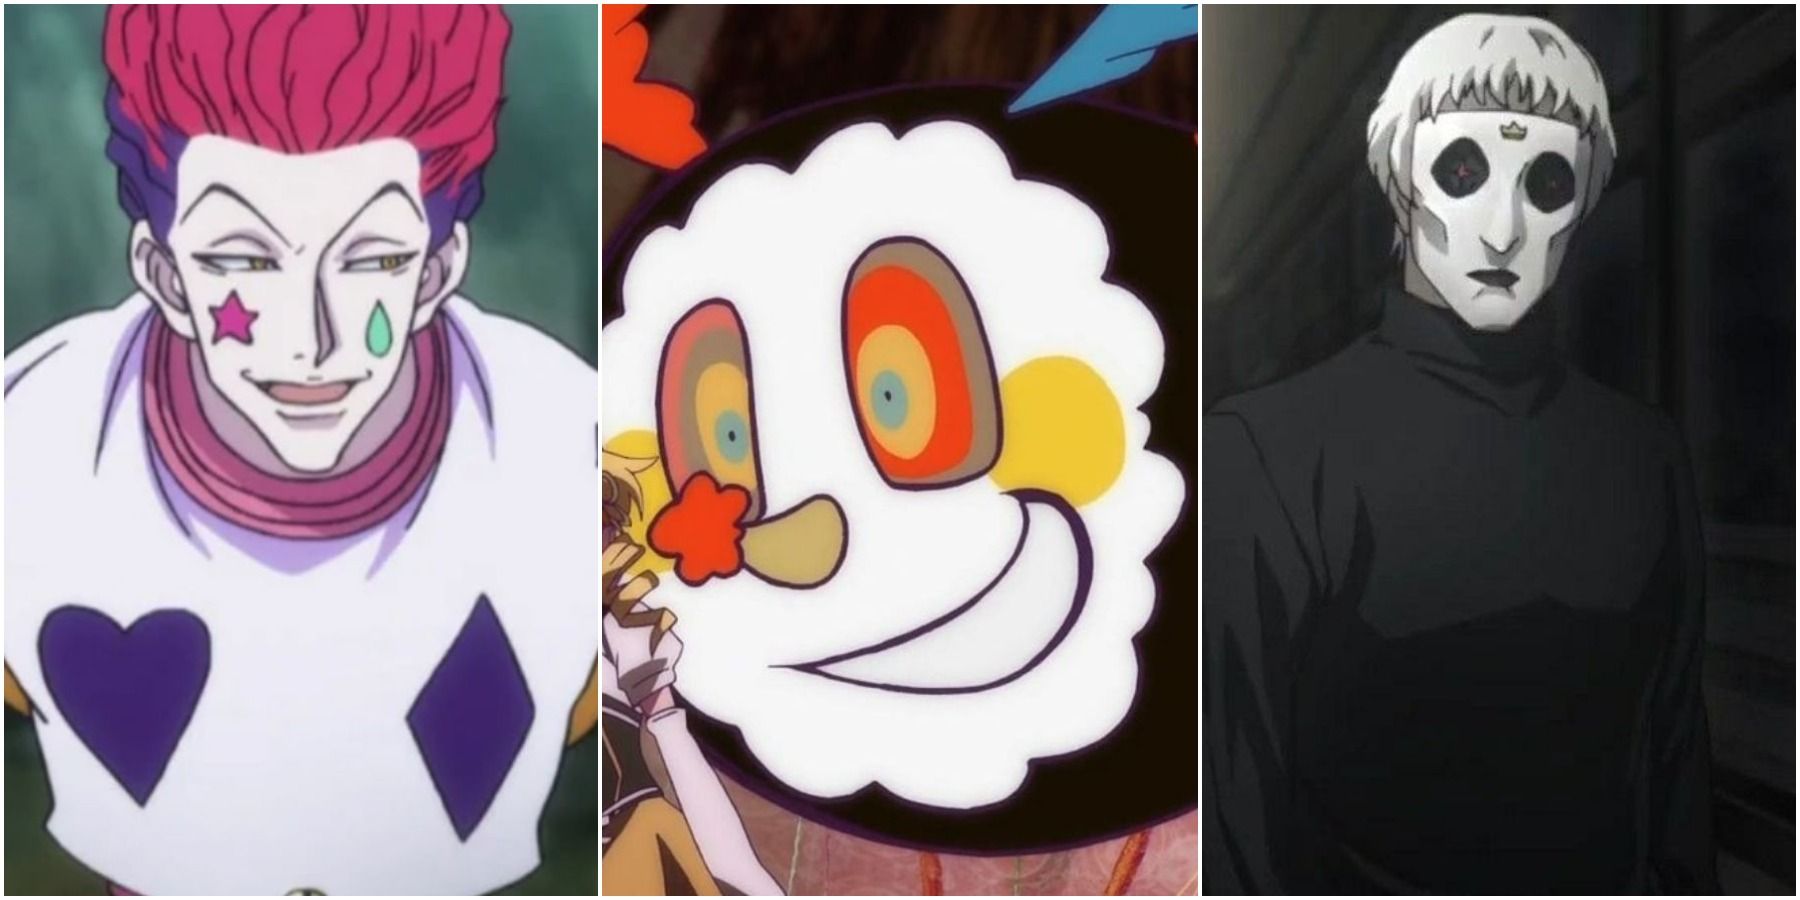 AI Art Generator: Young anime boy, clown, clothes with white and purple  vertical stipes. Sly smile clown make up. Looks like a jester, round eyes.  Corean features.